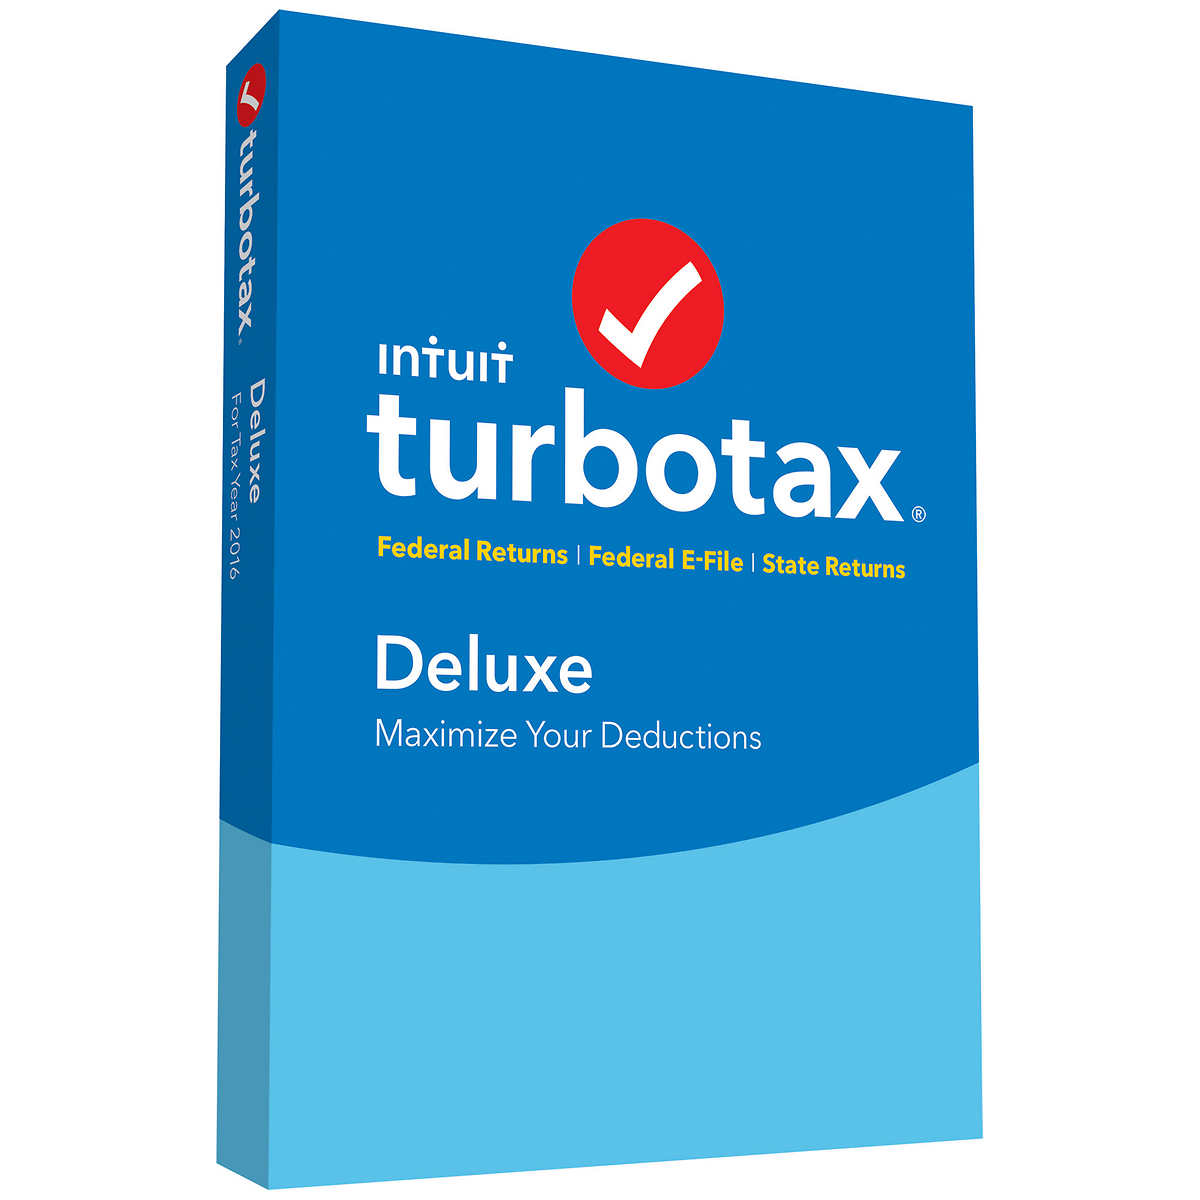 turbotax-canada-smart-canucks-exclusive-deal-save-20-off-when-you